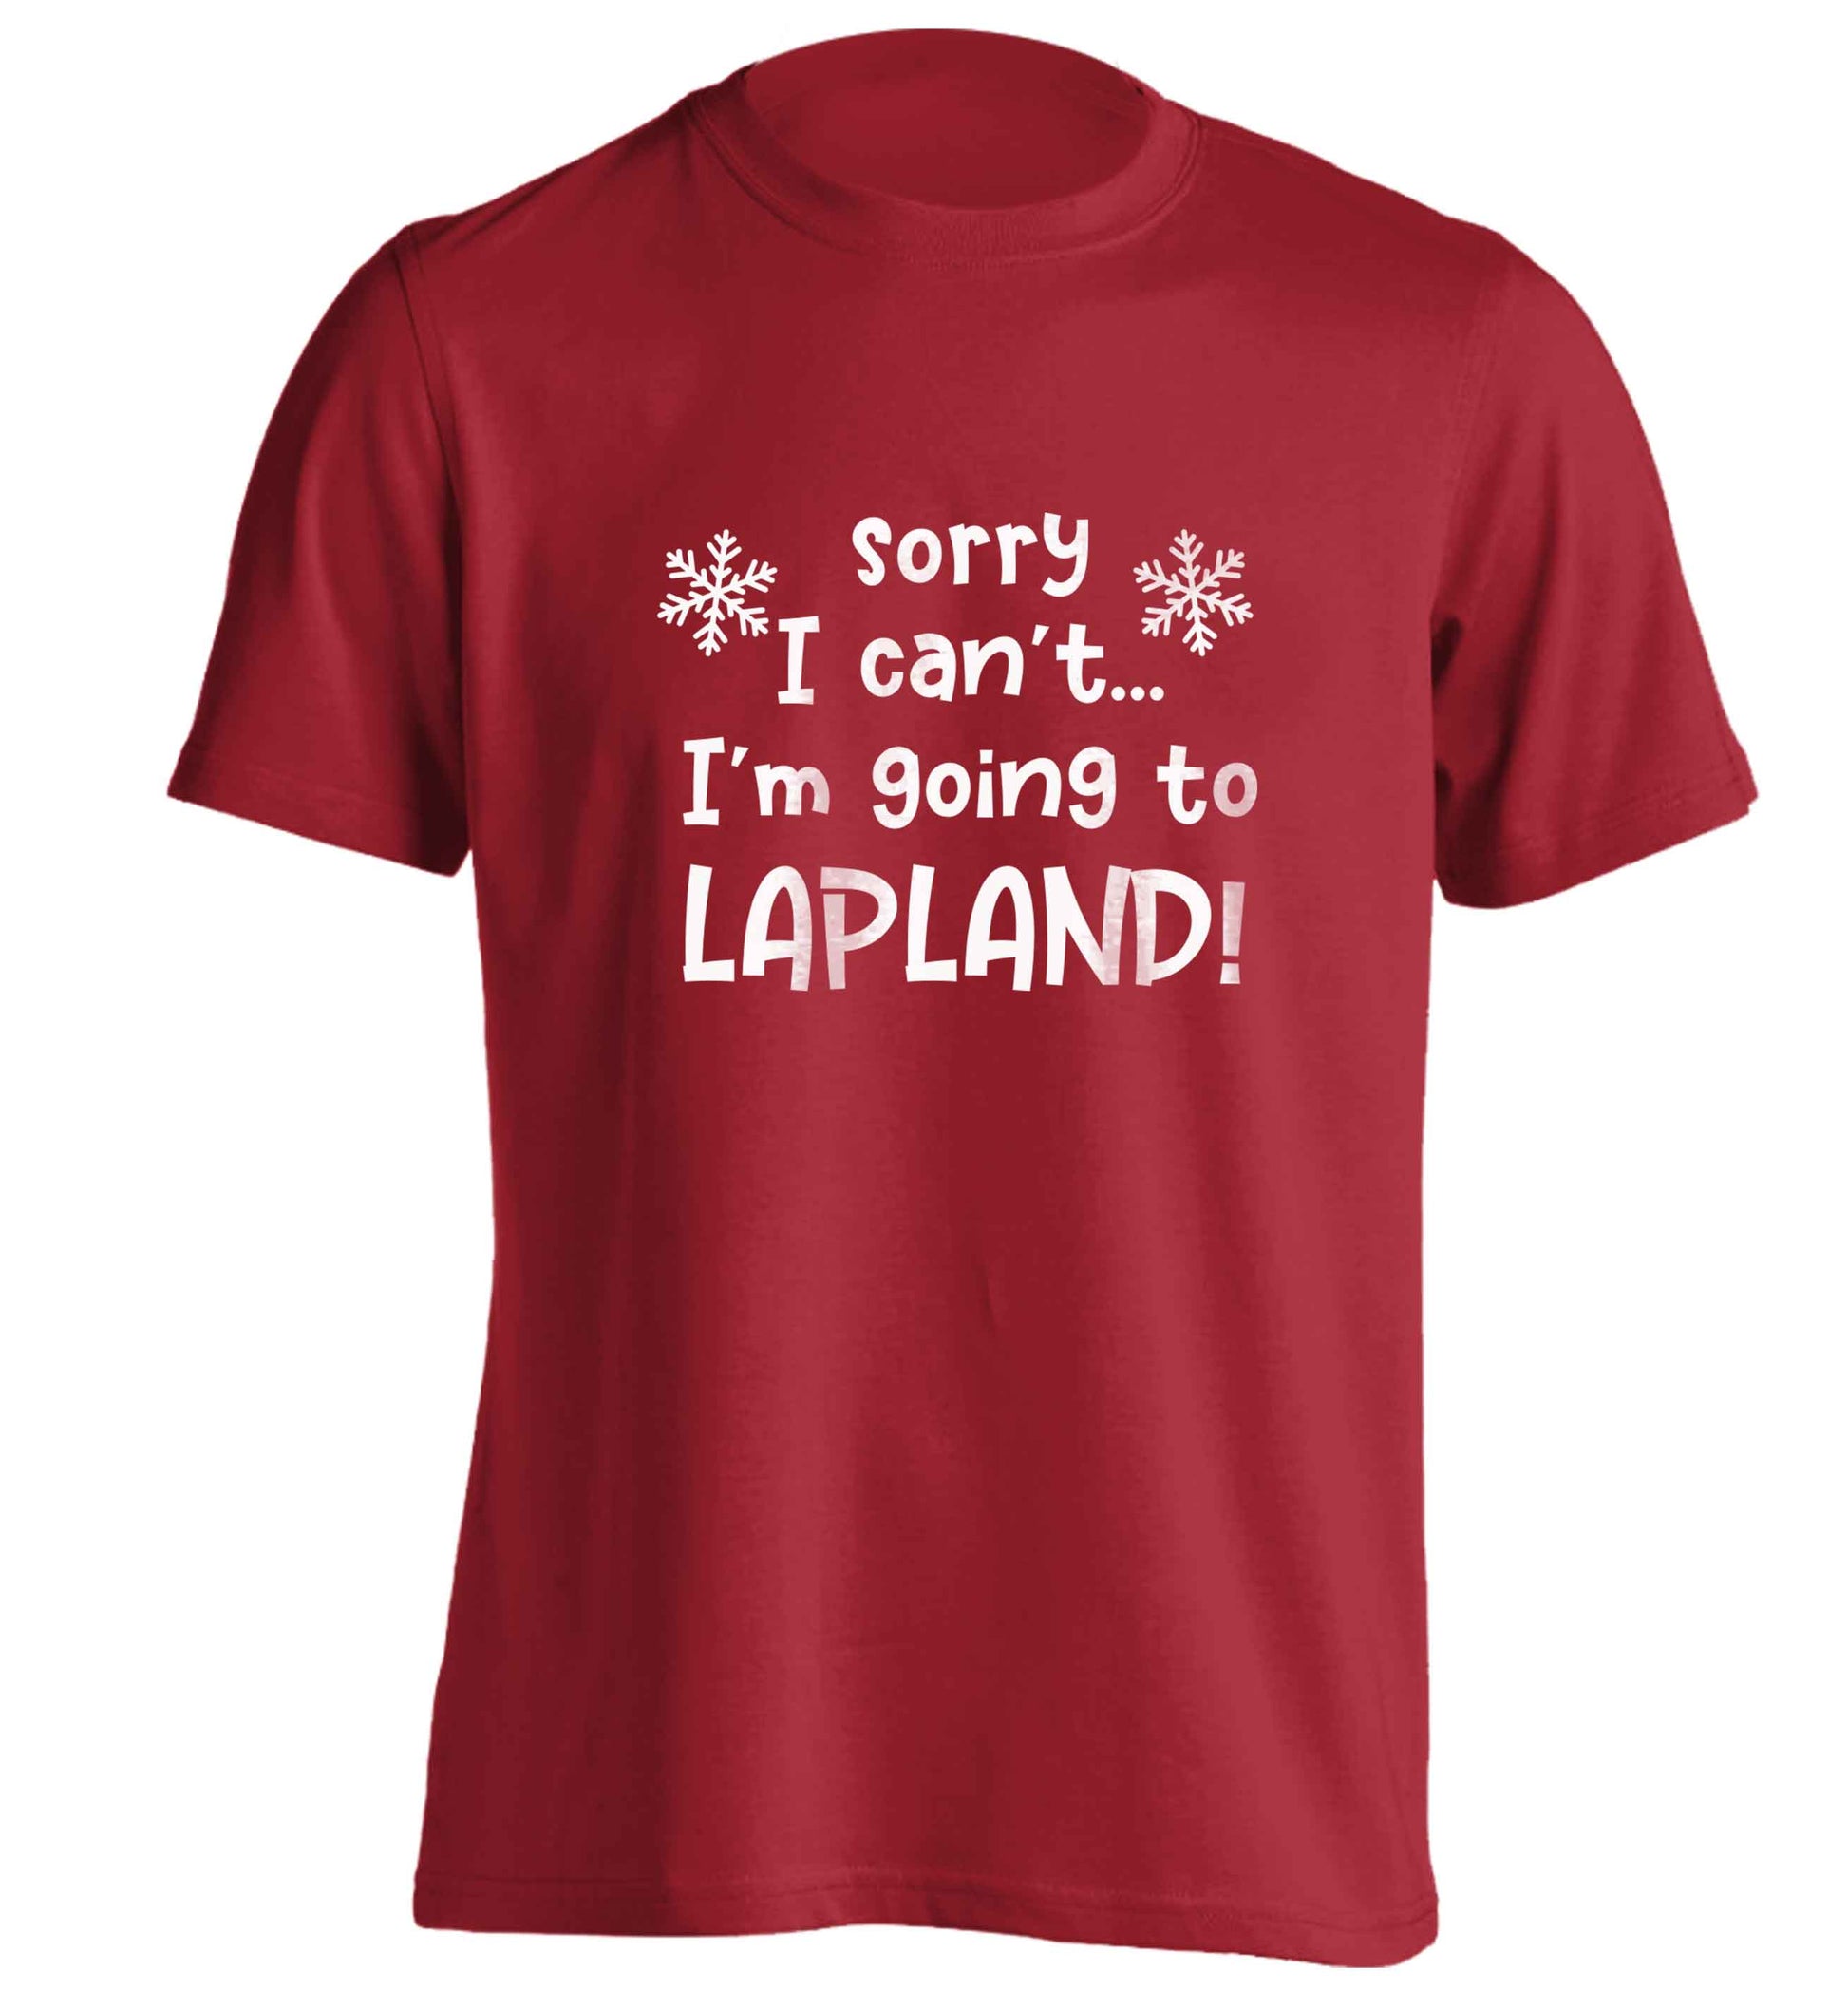 Sorry I can't I'm going to Lapland adults unisex red Tshirt 2XL